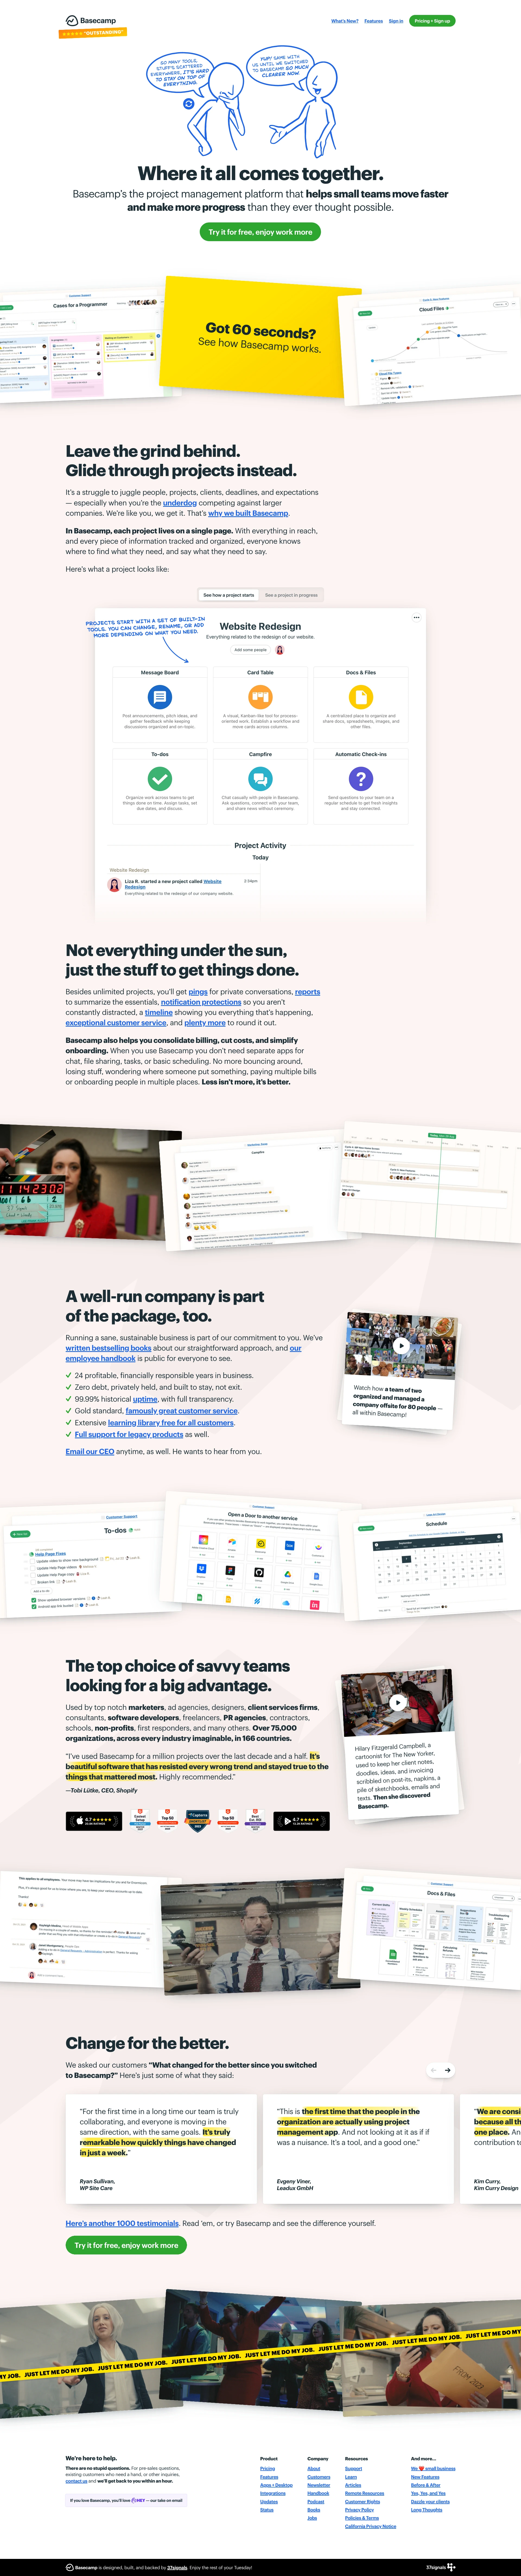 Basecamp Landing Page Example: Basecamp’s the project management platform that helps small teams move faster and make more progress than they ever thought possible.